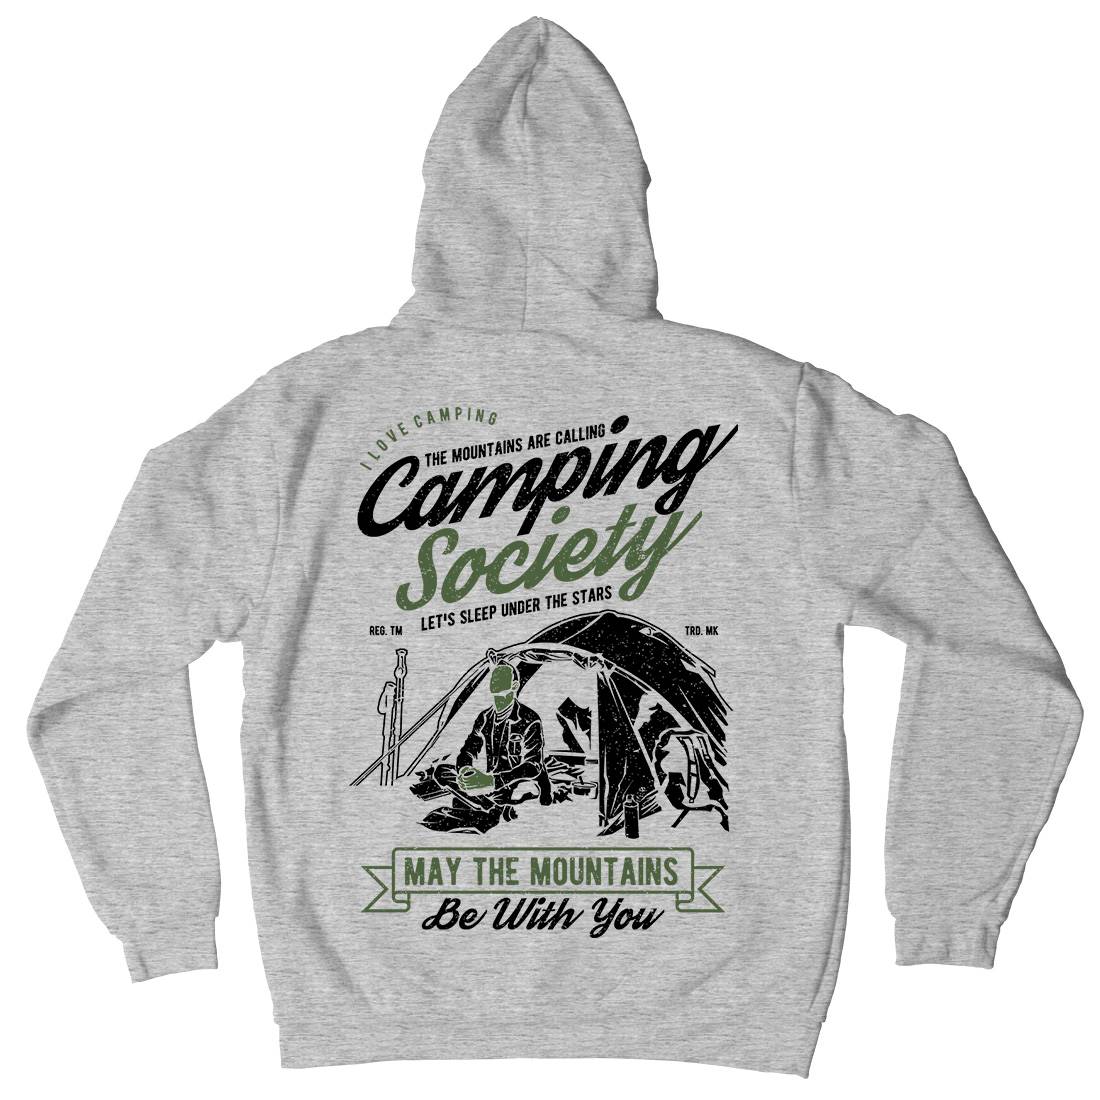 Camping Society Kids Crew Neck Hoodie Nature A631